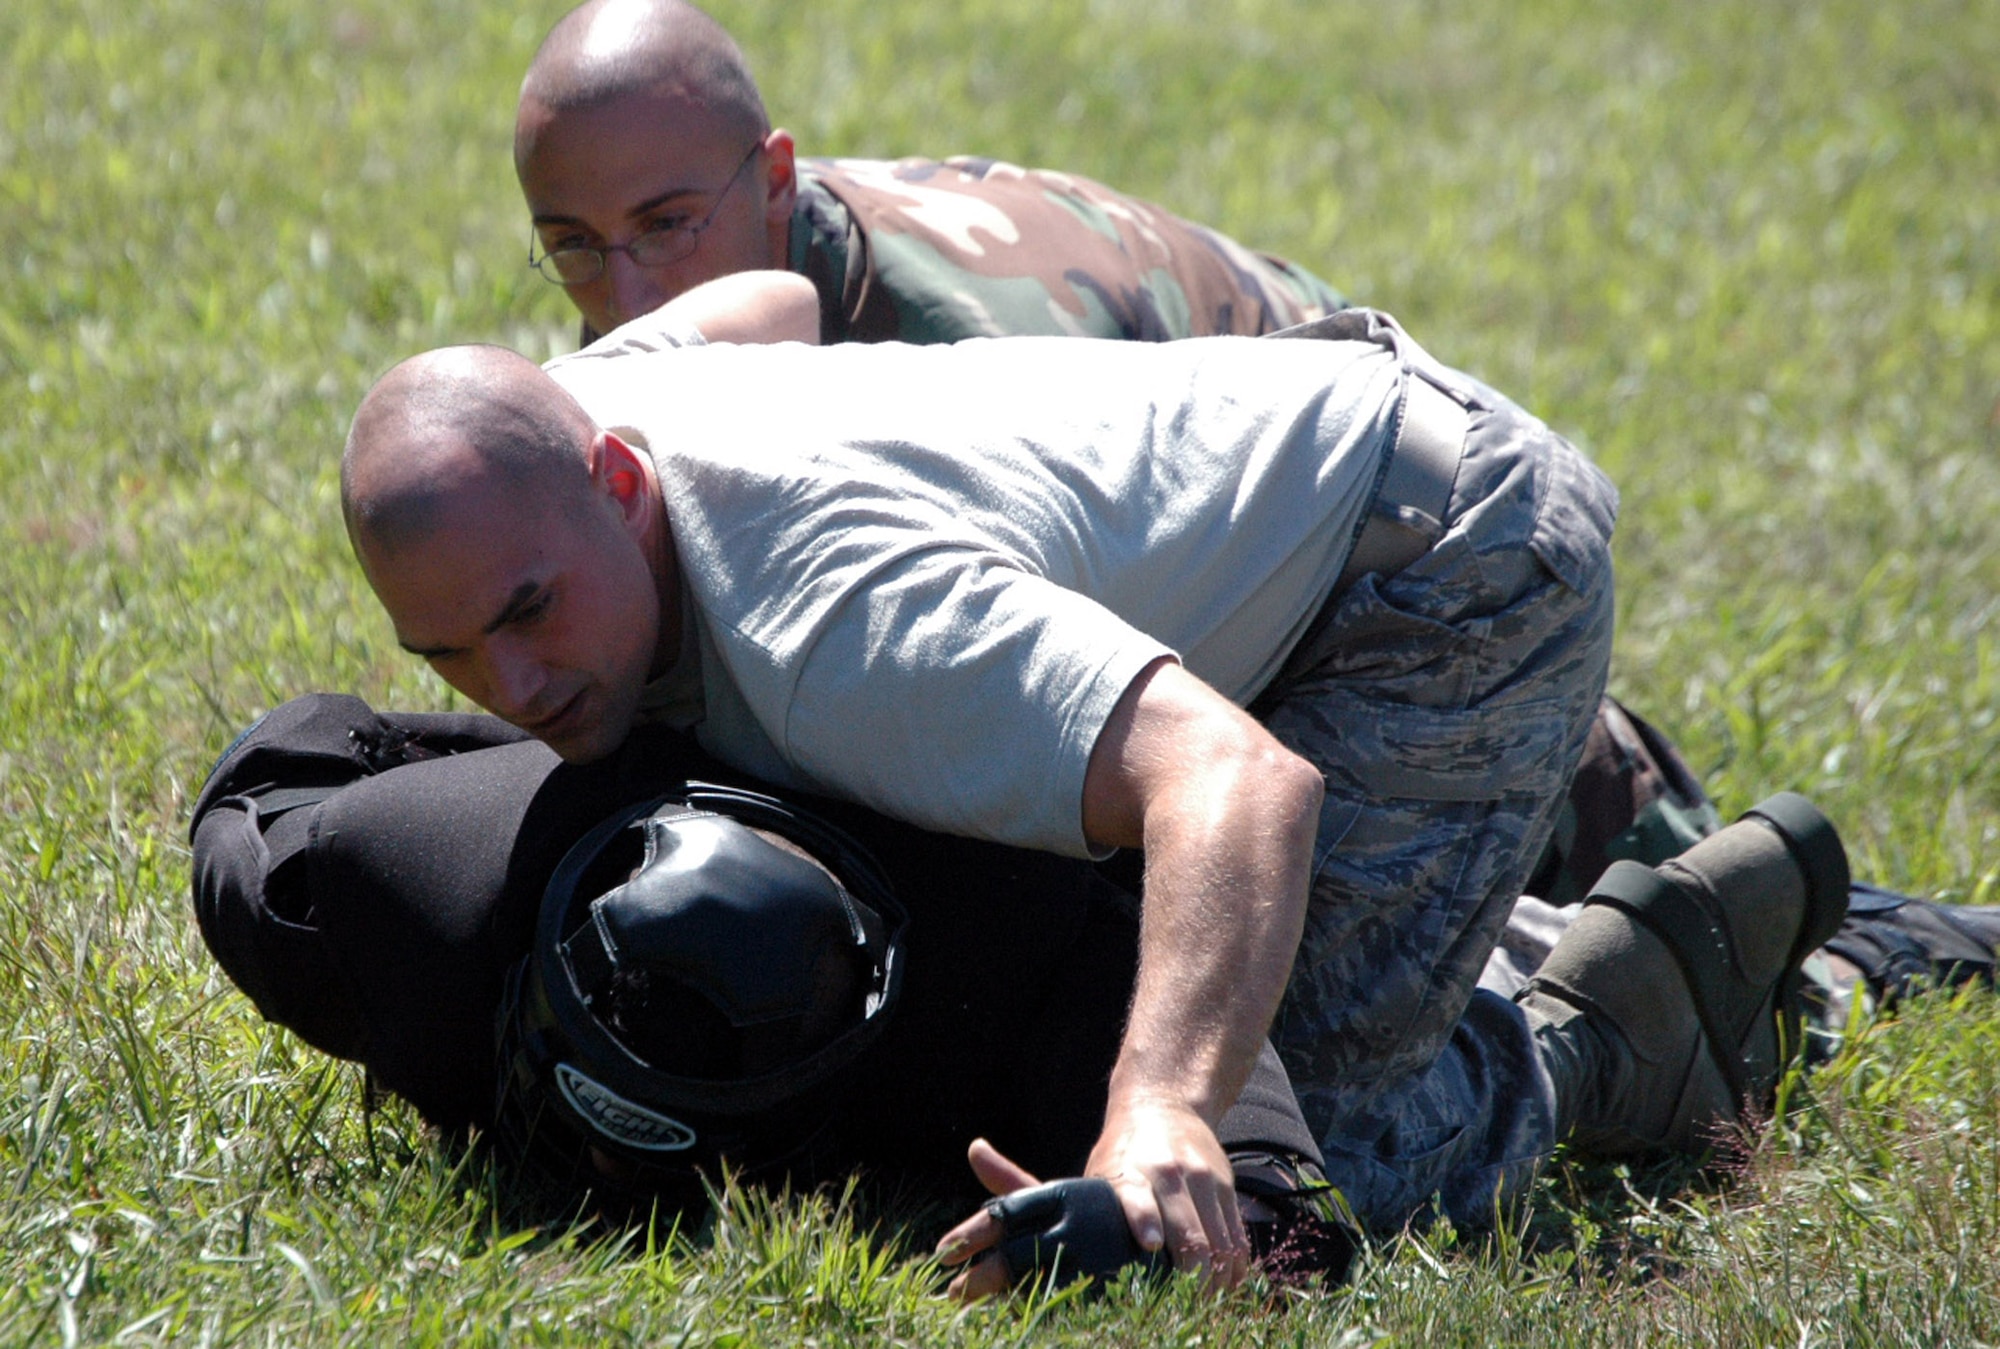 Students in the Air Force Phoenix Raven Training Course restrain an "aggressor" during an evaluation session in the course on a Fort Dix, N.J., range Aug. 20, 2008.  The course, taught by the U.S. Air Force Expeditionary Center's 421st Combat Training Squadron, trains security forces Airmen to become Ravens where they specialize in protecting Air Force aircraft in austere environments.  (U.S. Air Force Photo/Tech. Sgt. Scott T. Sturkol)